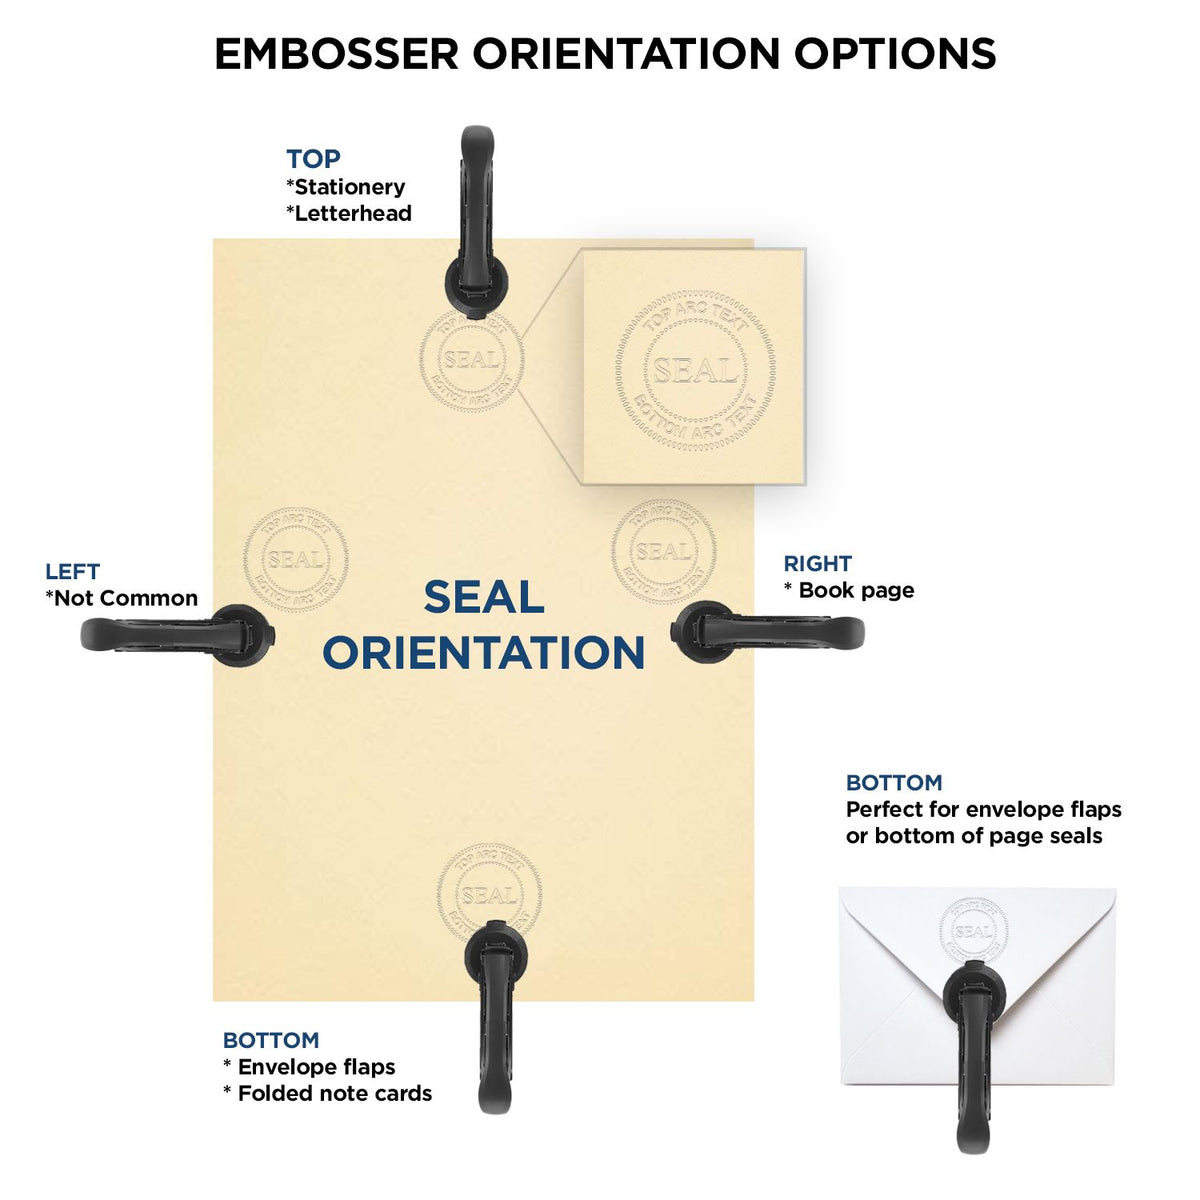 An infographic for the Delaware Geologist Desk Seal showing embosser orientation, this is showing examples of a top, bottom, right and left insert.